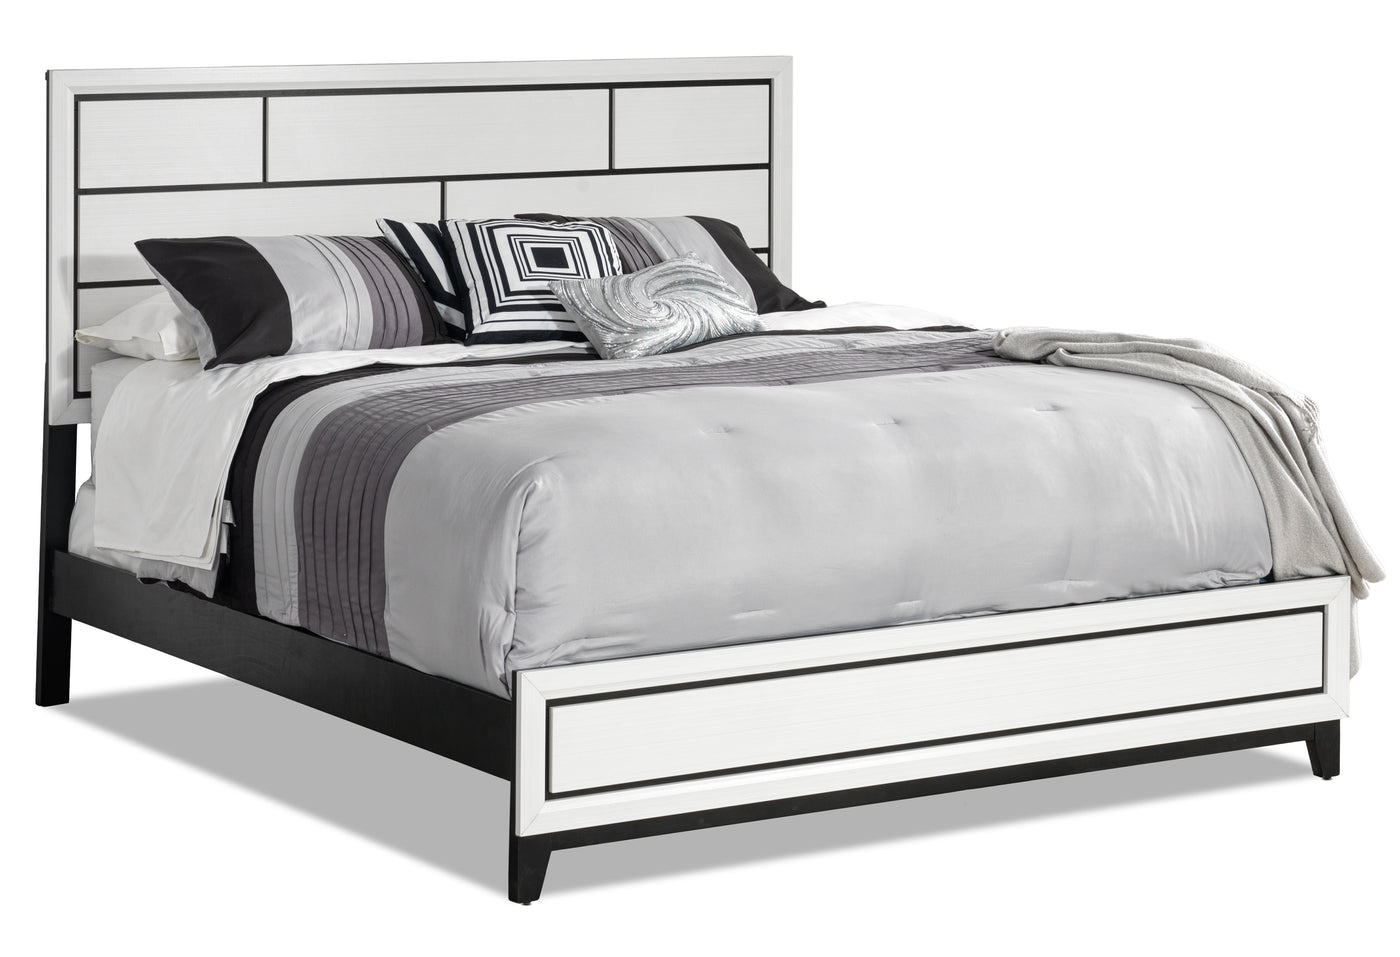 Frost 5-Piece King Bedroom Package - White, Black